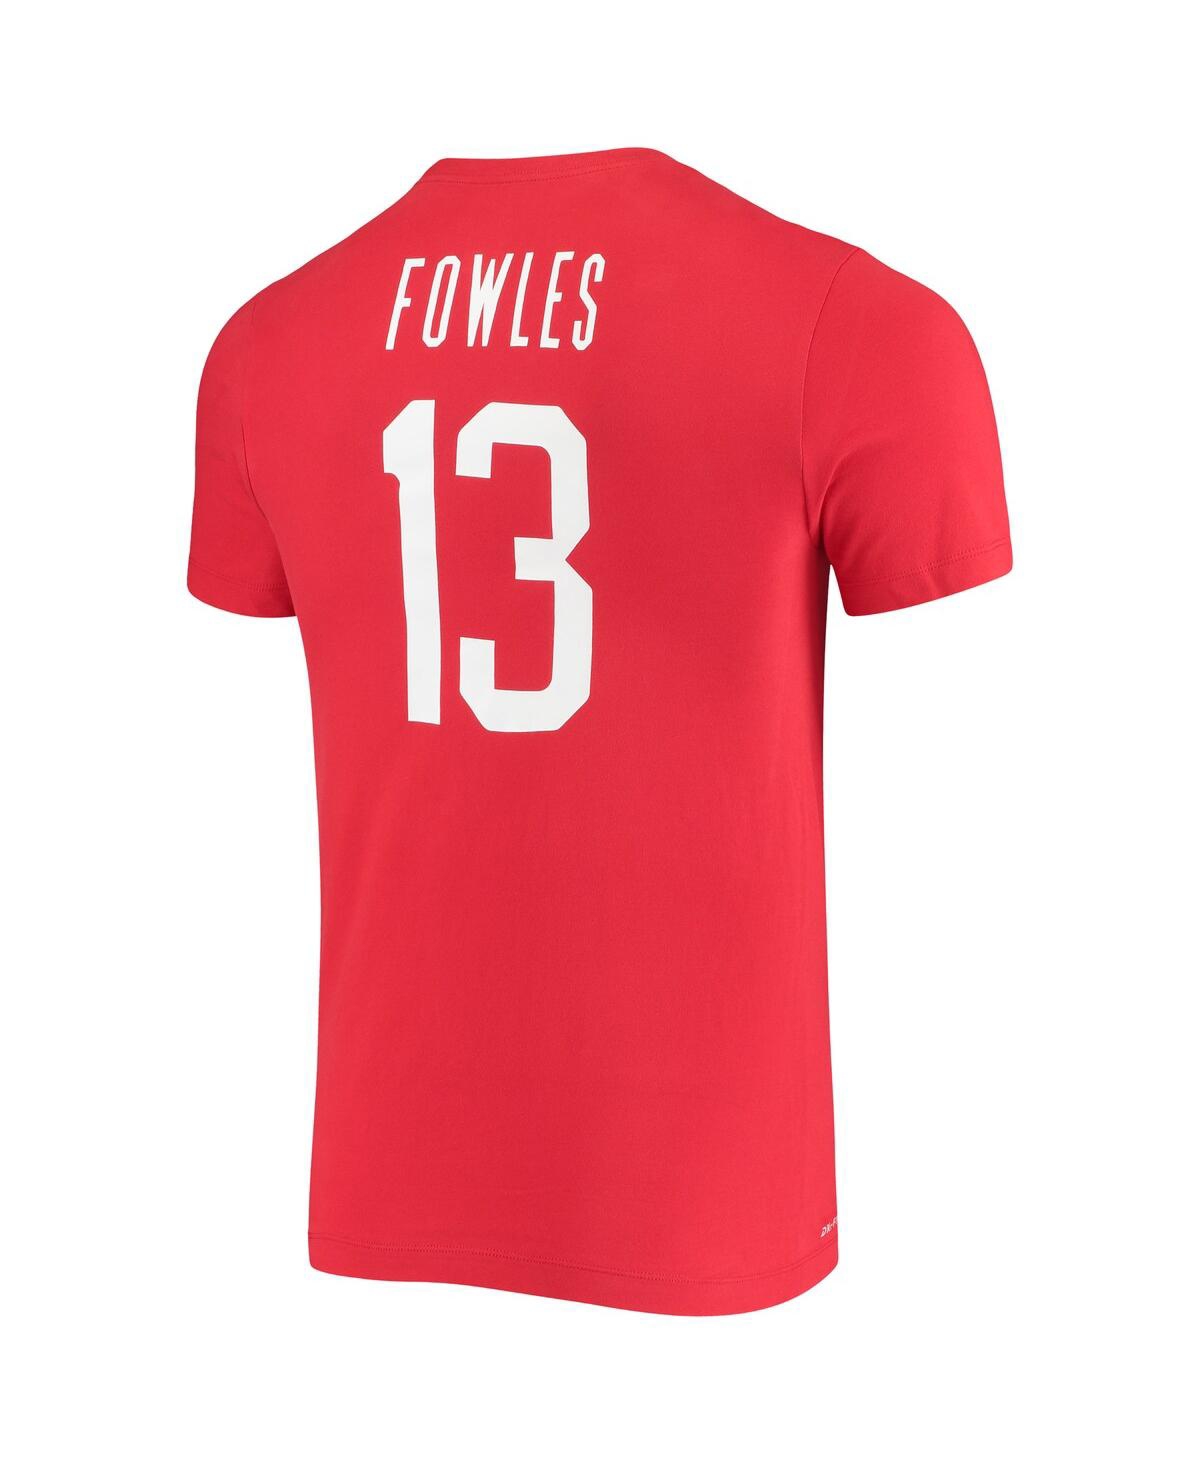 Shop Nike Women's  Sylvia Fowles Usa Basketball Red Name And Number Performance T-shirt